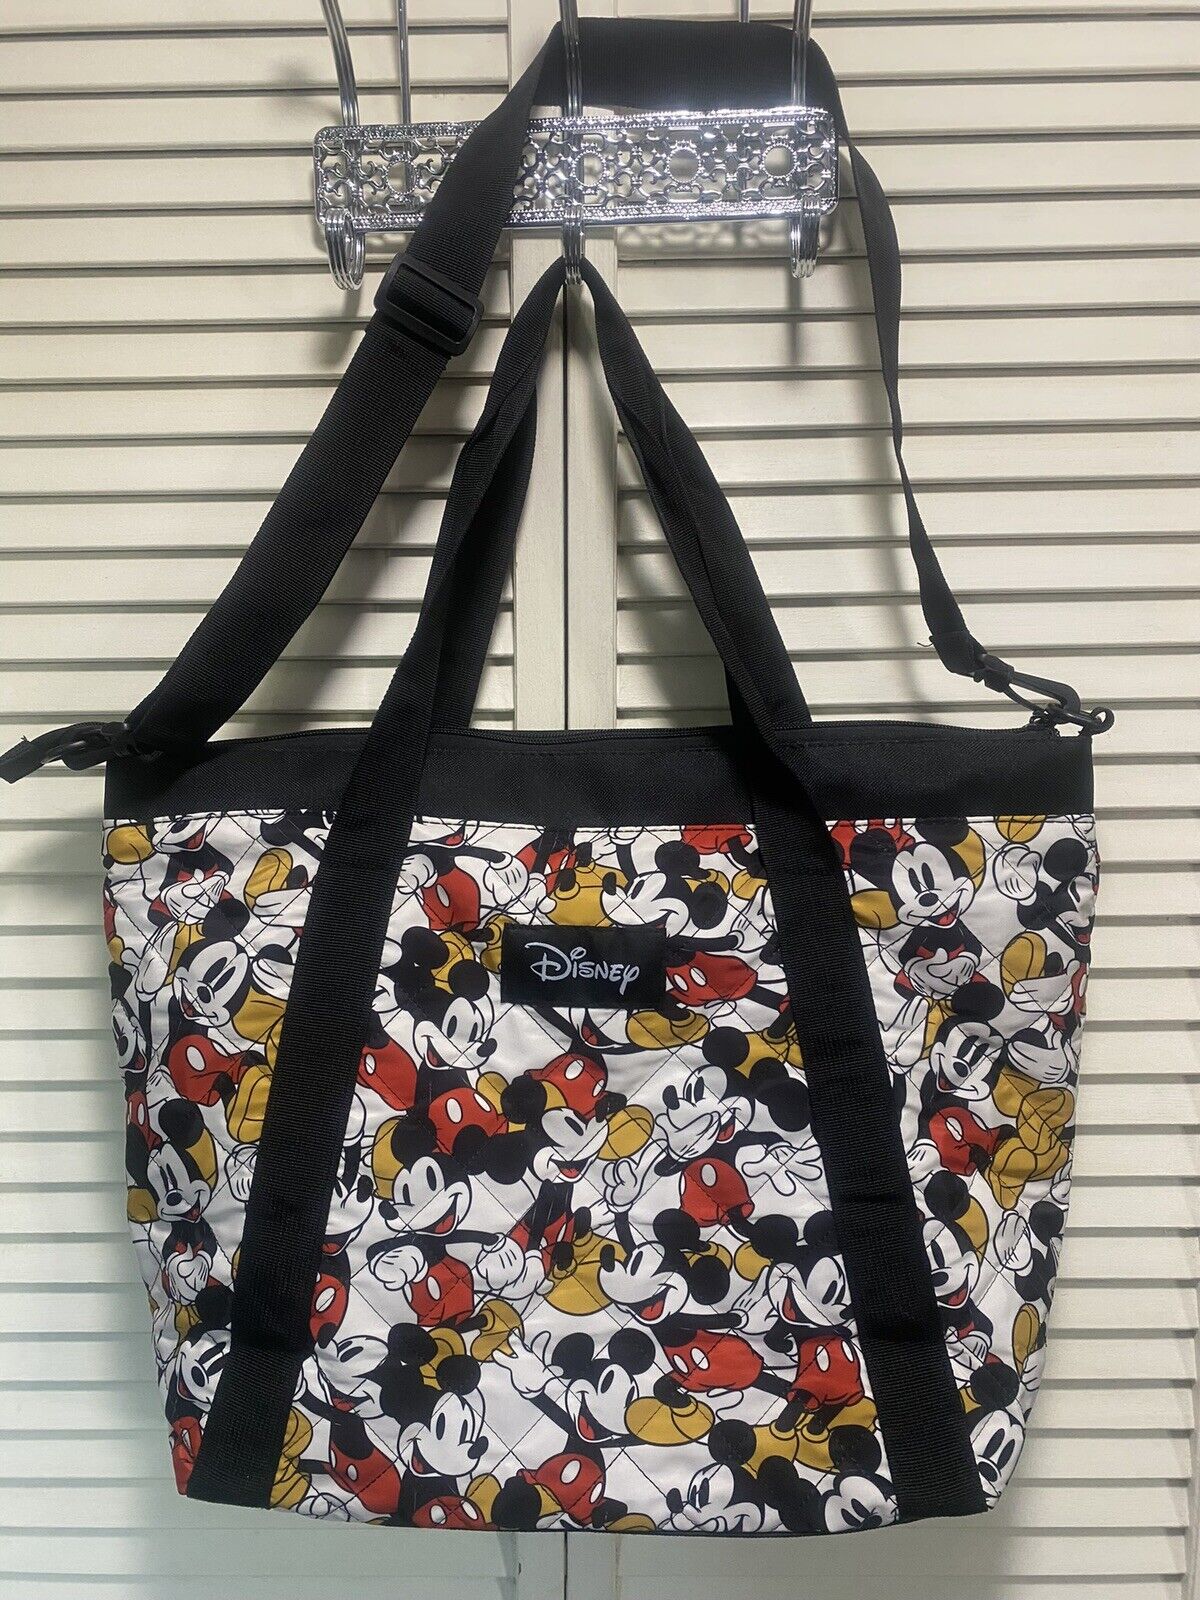 Disney Mickey Mouse Tote Bag by Bioworld Quilt Design-NWOT